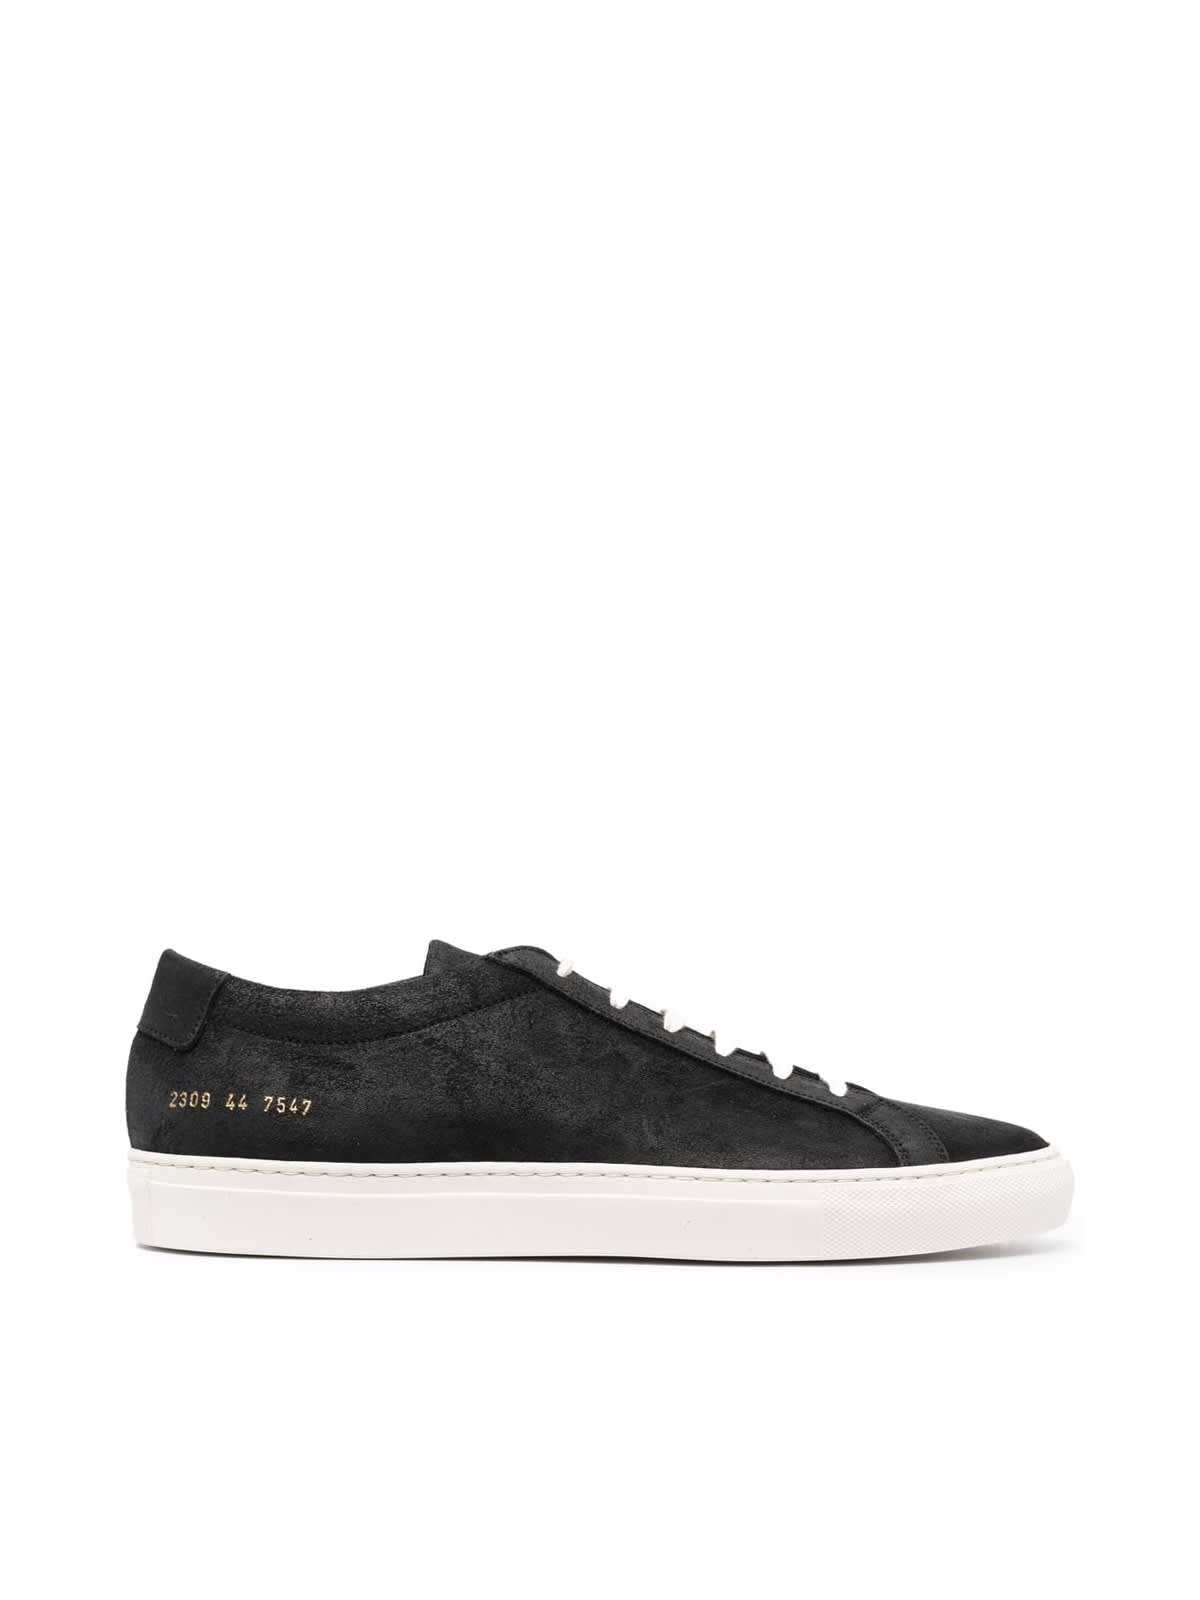 Common Projects Achilles Low In Waxed Suede 2309